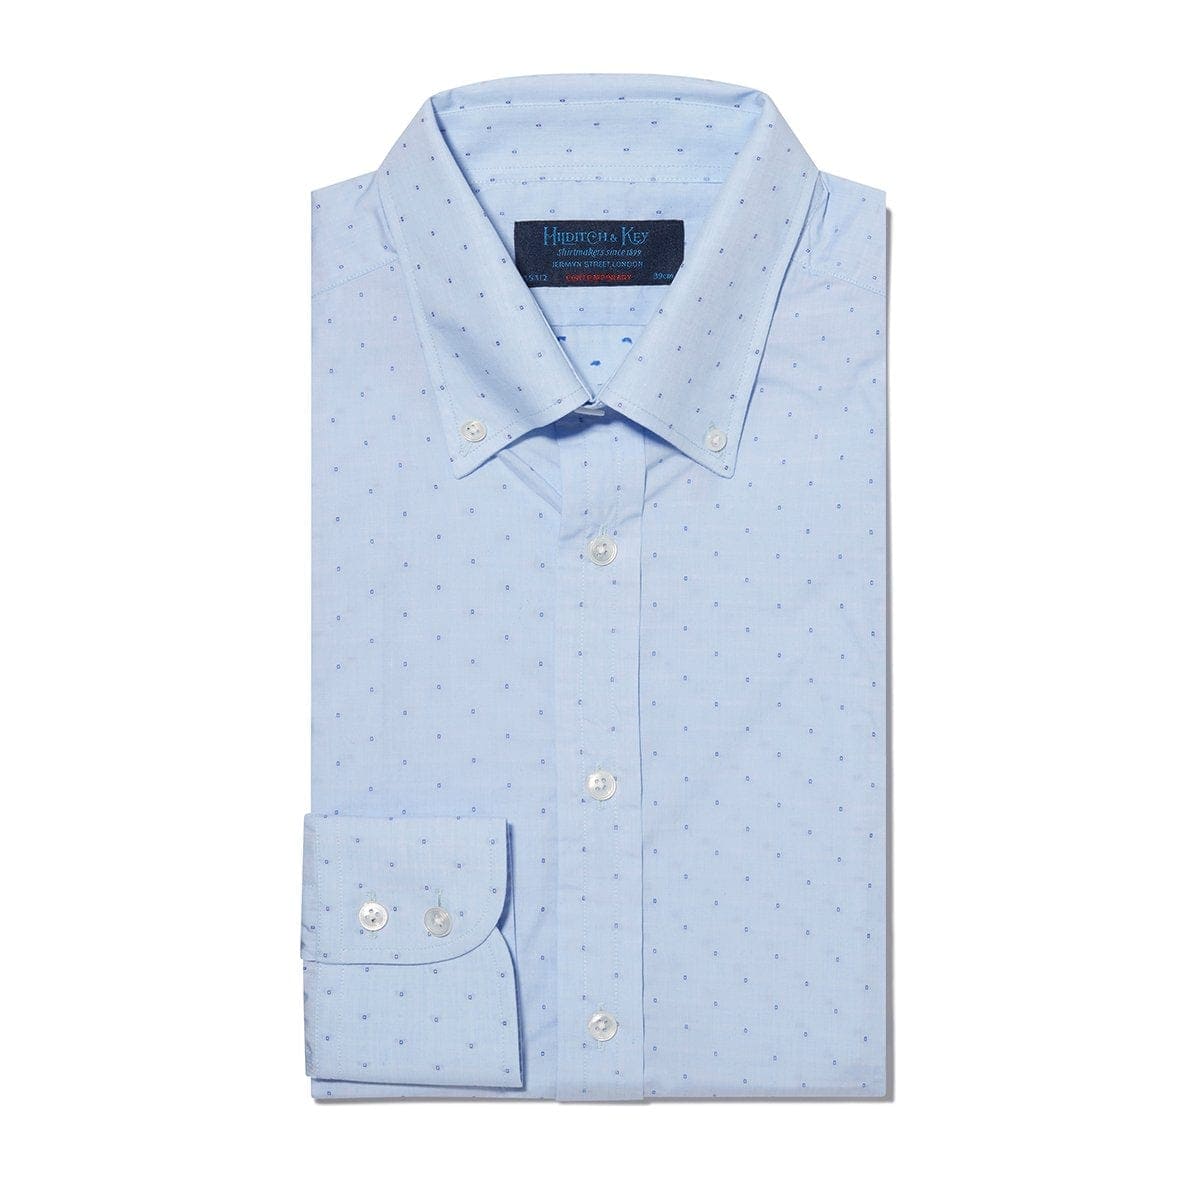 Contemporary Fit, Button Down Collar, 2 Button Cuff Shirt In Light Blue With Small Navy Cubes